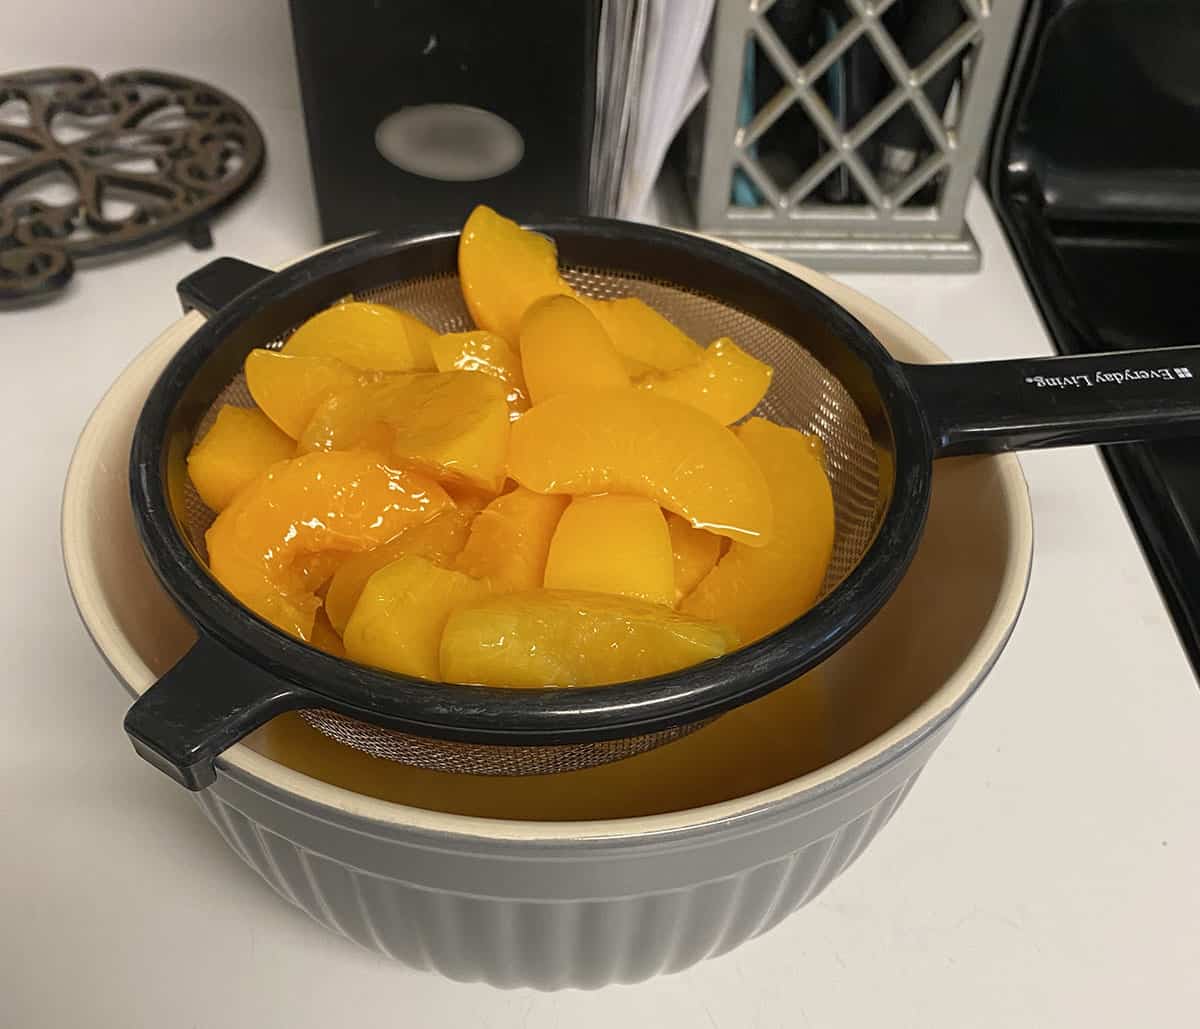 Canned sliced peaches in a strainer over a bowl collecting the peach juice.